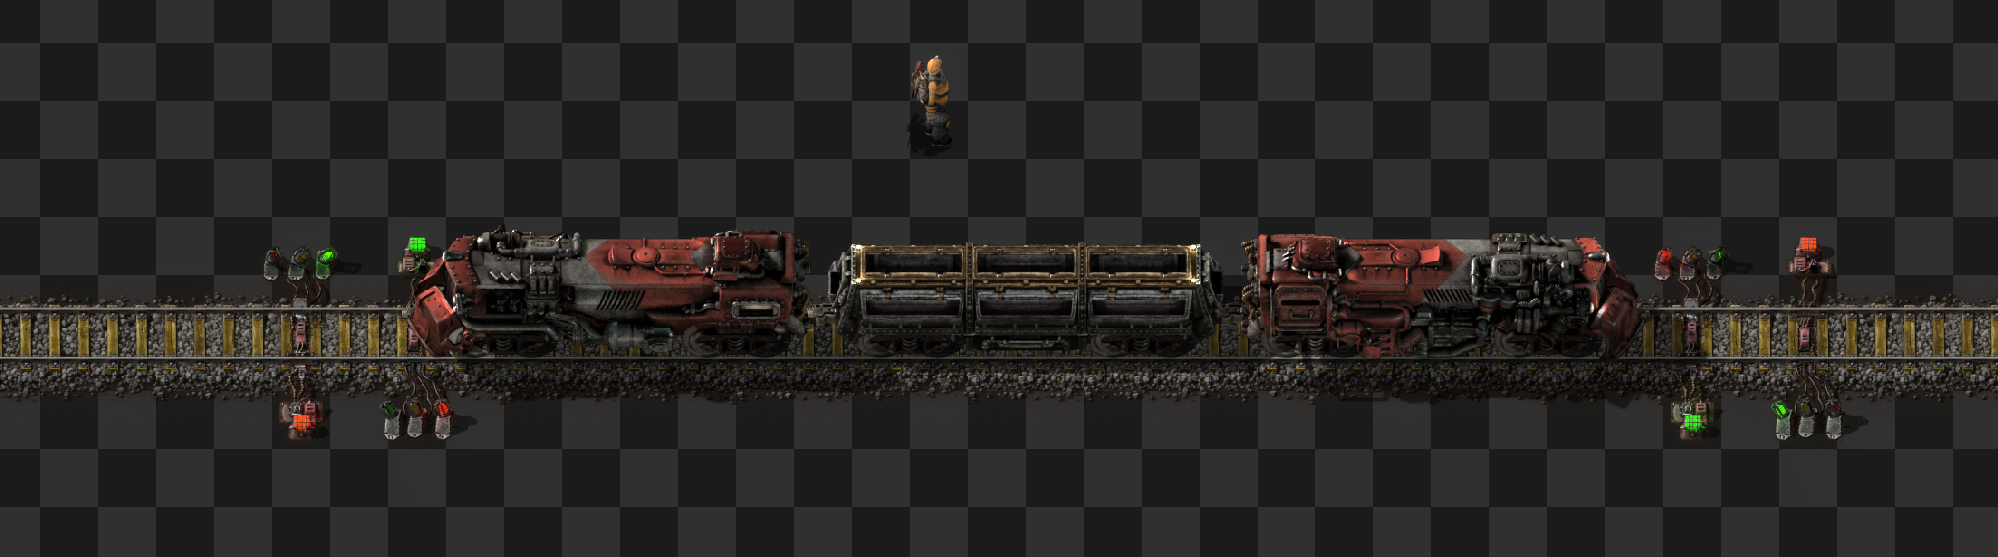 double-train.png